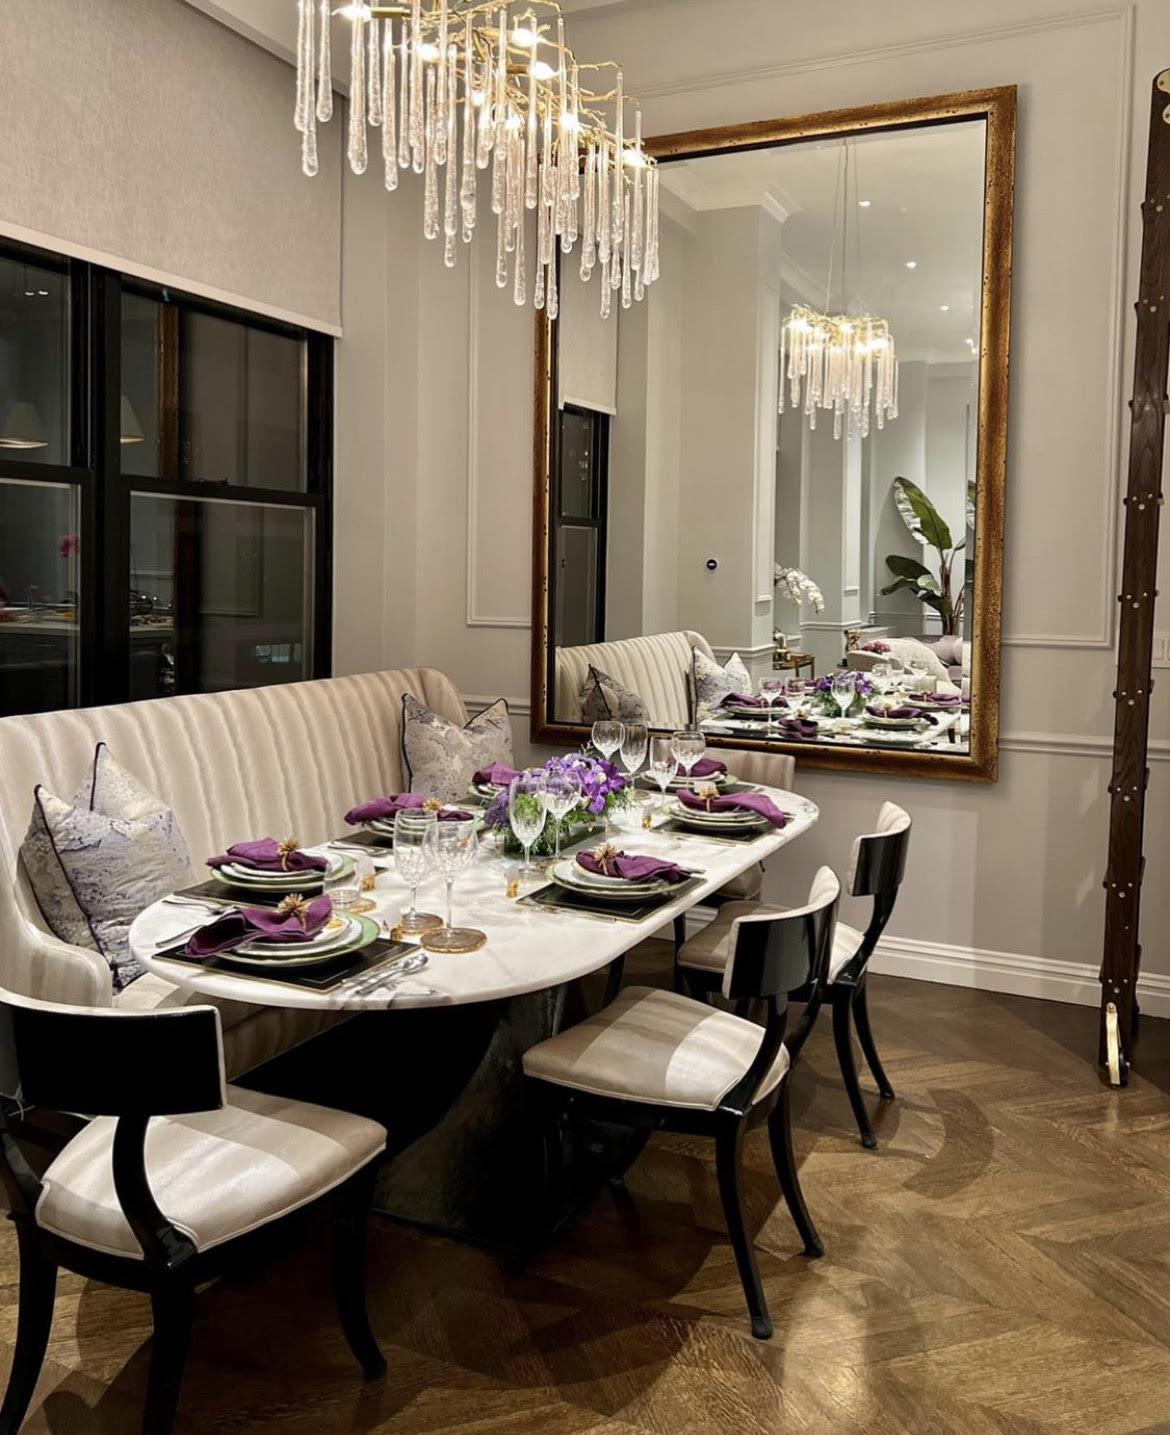 A dramatic oversized mirror adds scale to this dining room designed by Luis Enrique Design.